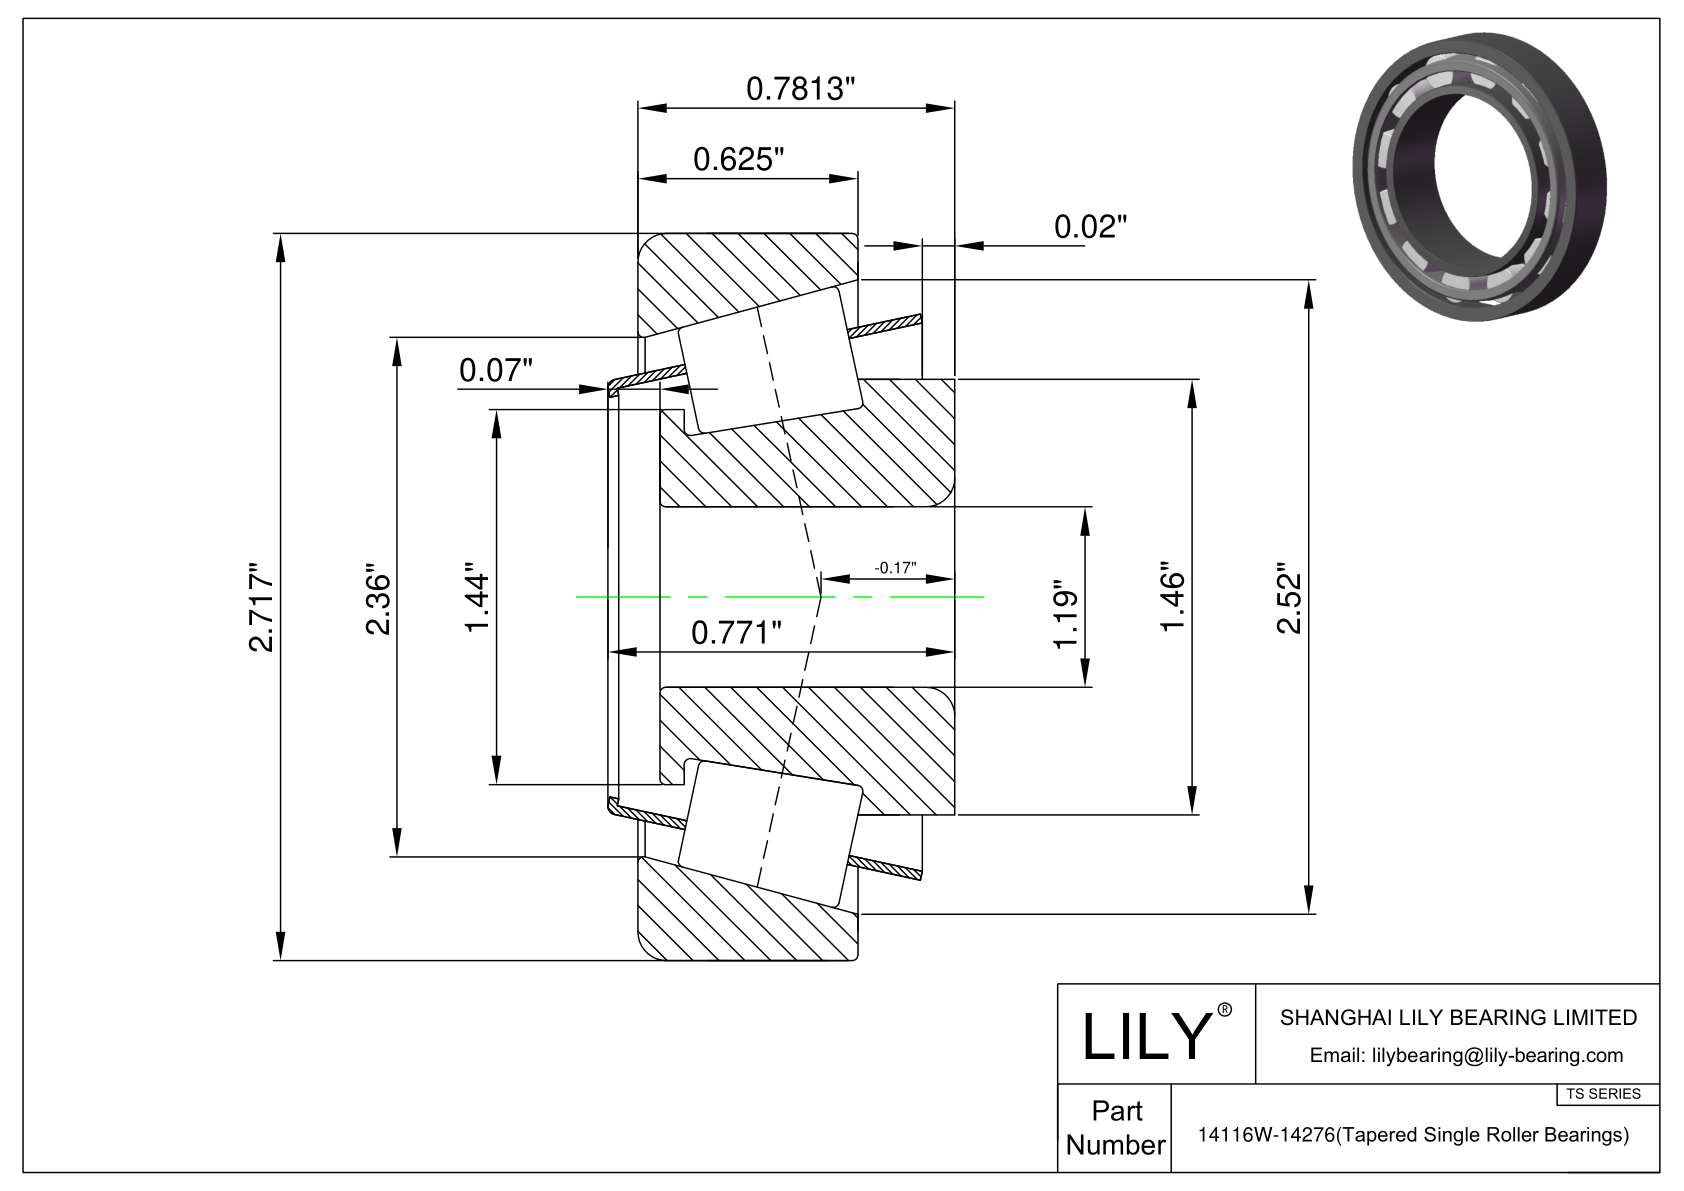 14116W-14276 TS (Tapered Single Roller Bearings) (Imperial) cad drawing